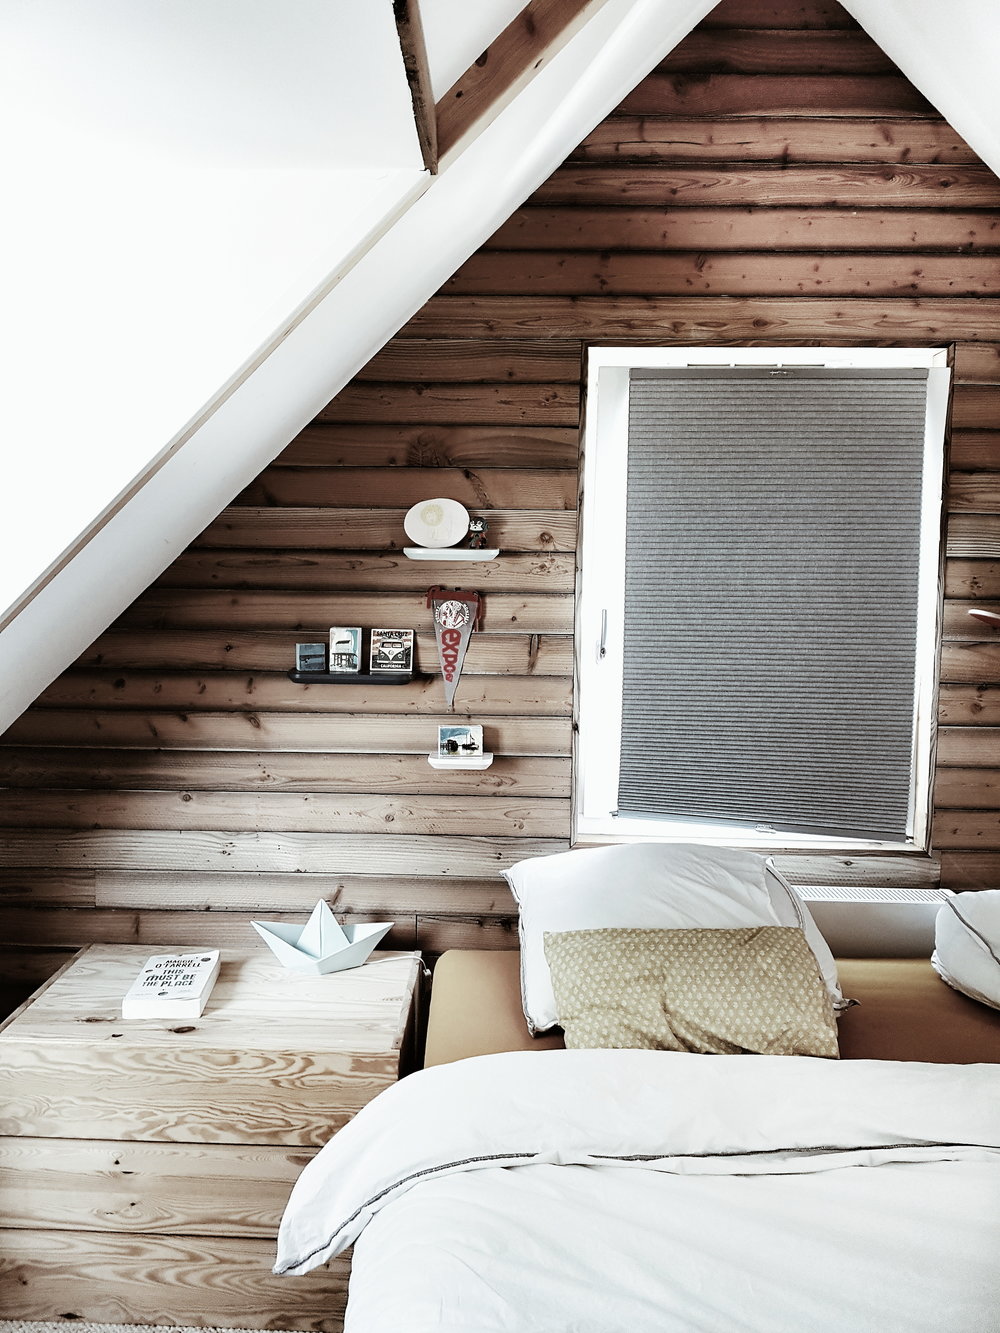  I loved the wood cladding wall which added a rustic edge to the Scandi decor 